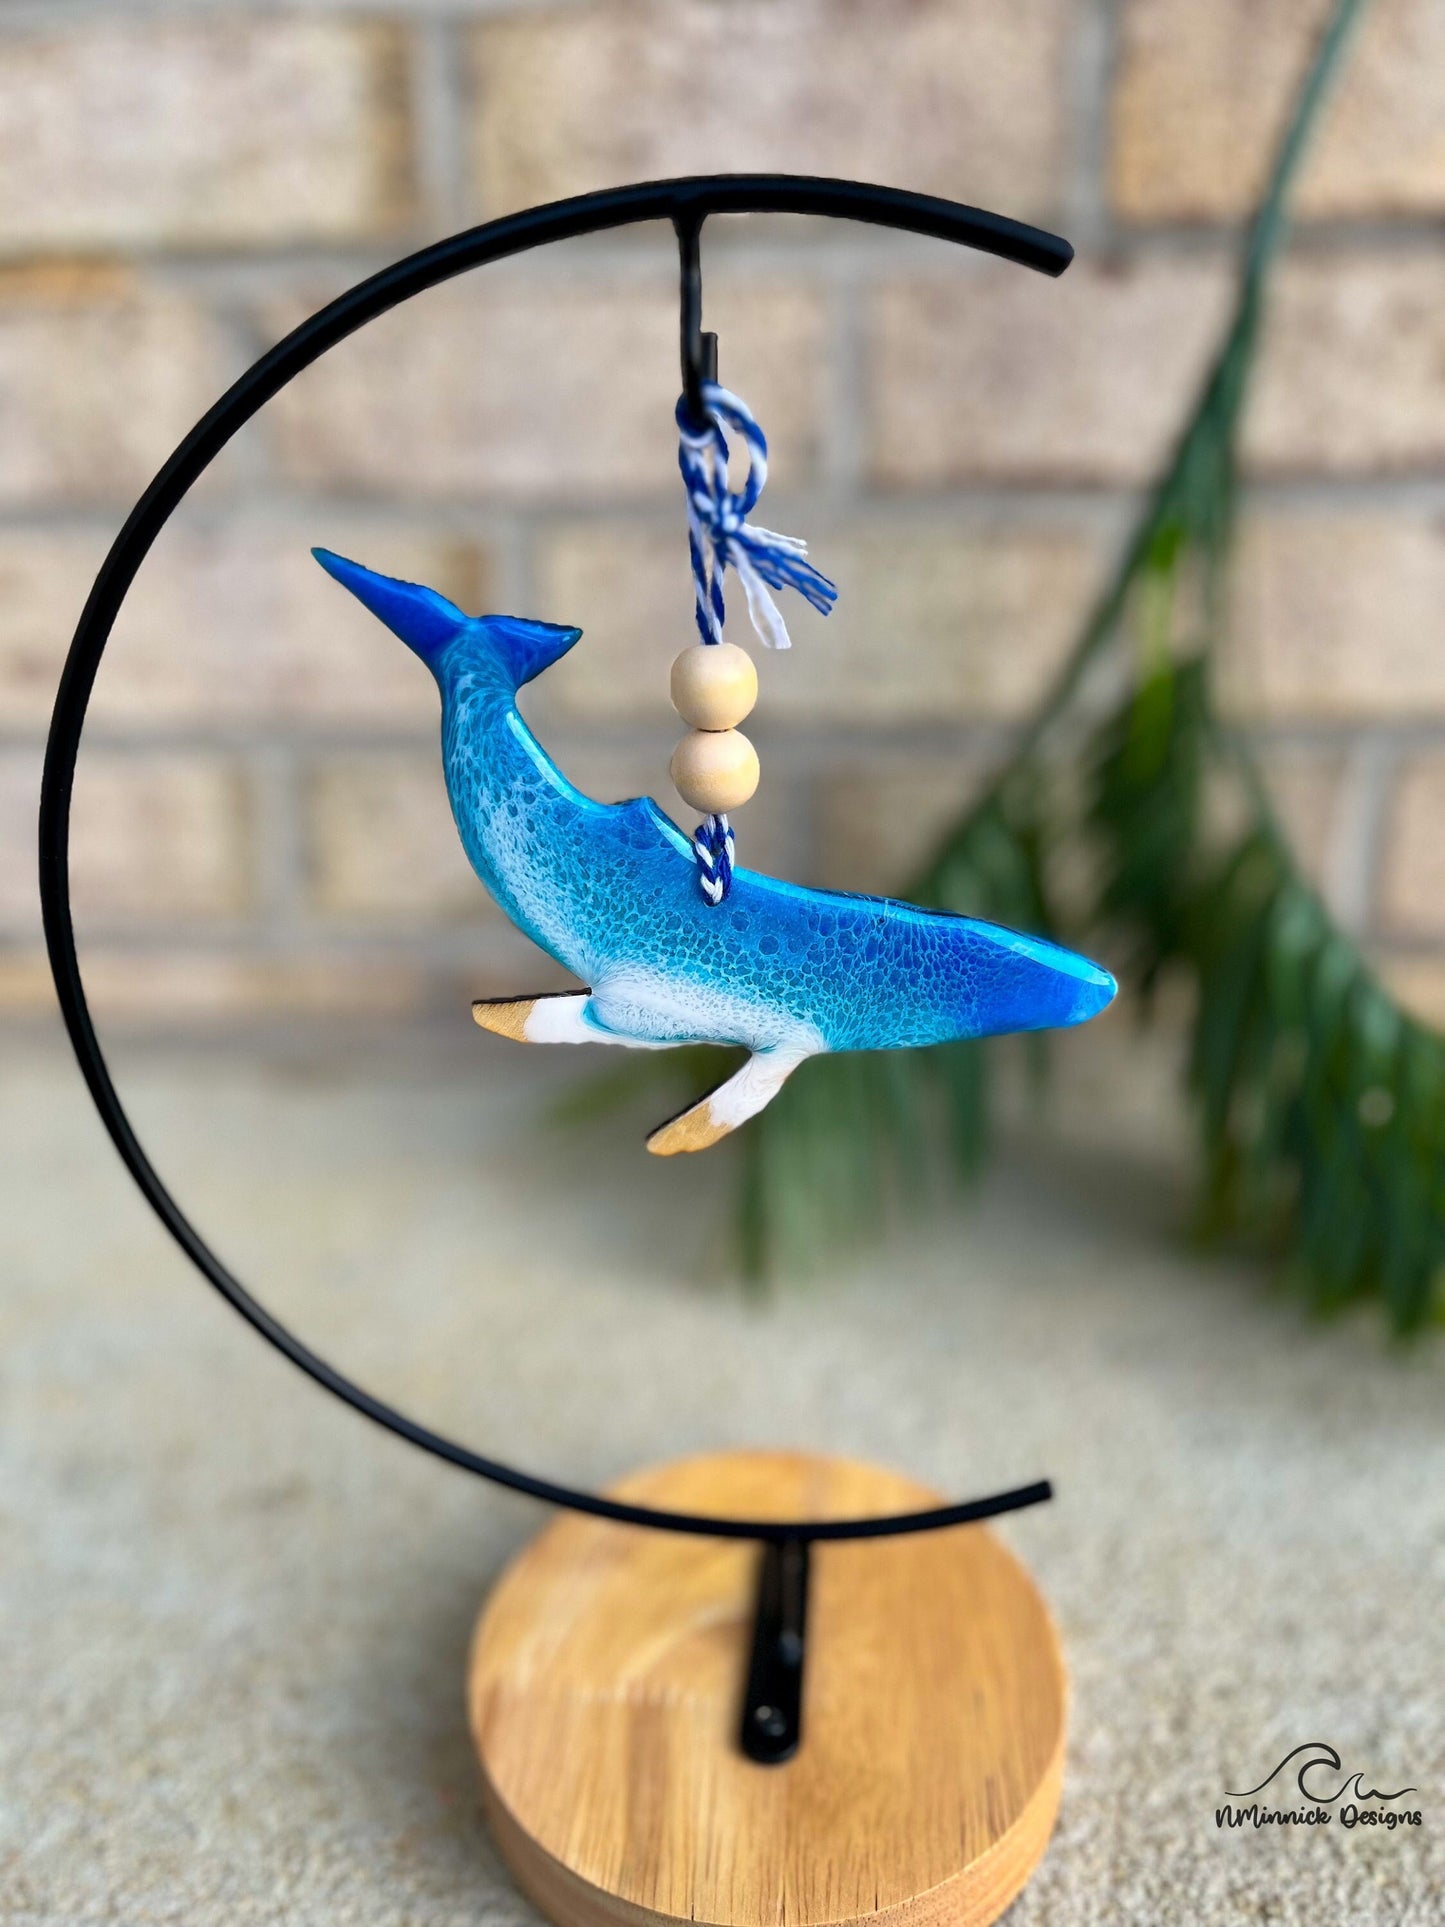 A humpback whale shaped ornament with blue and white ocean resin art, hanging on an ornament stand.